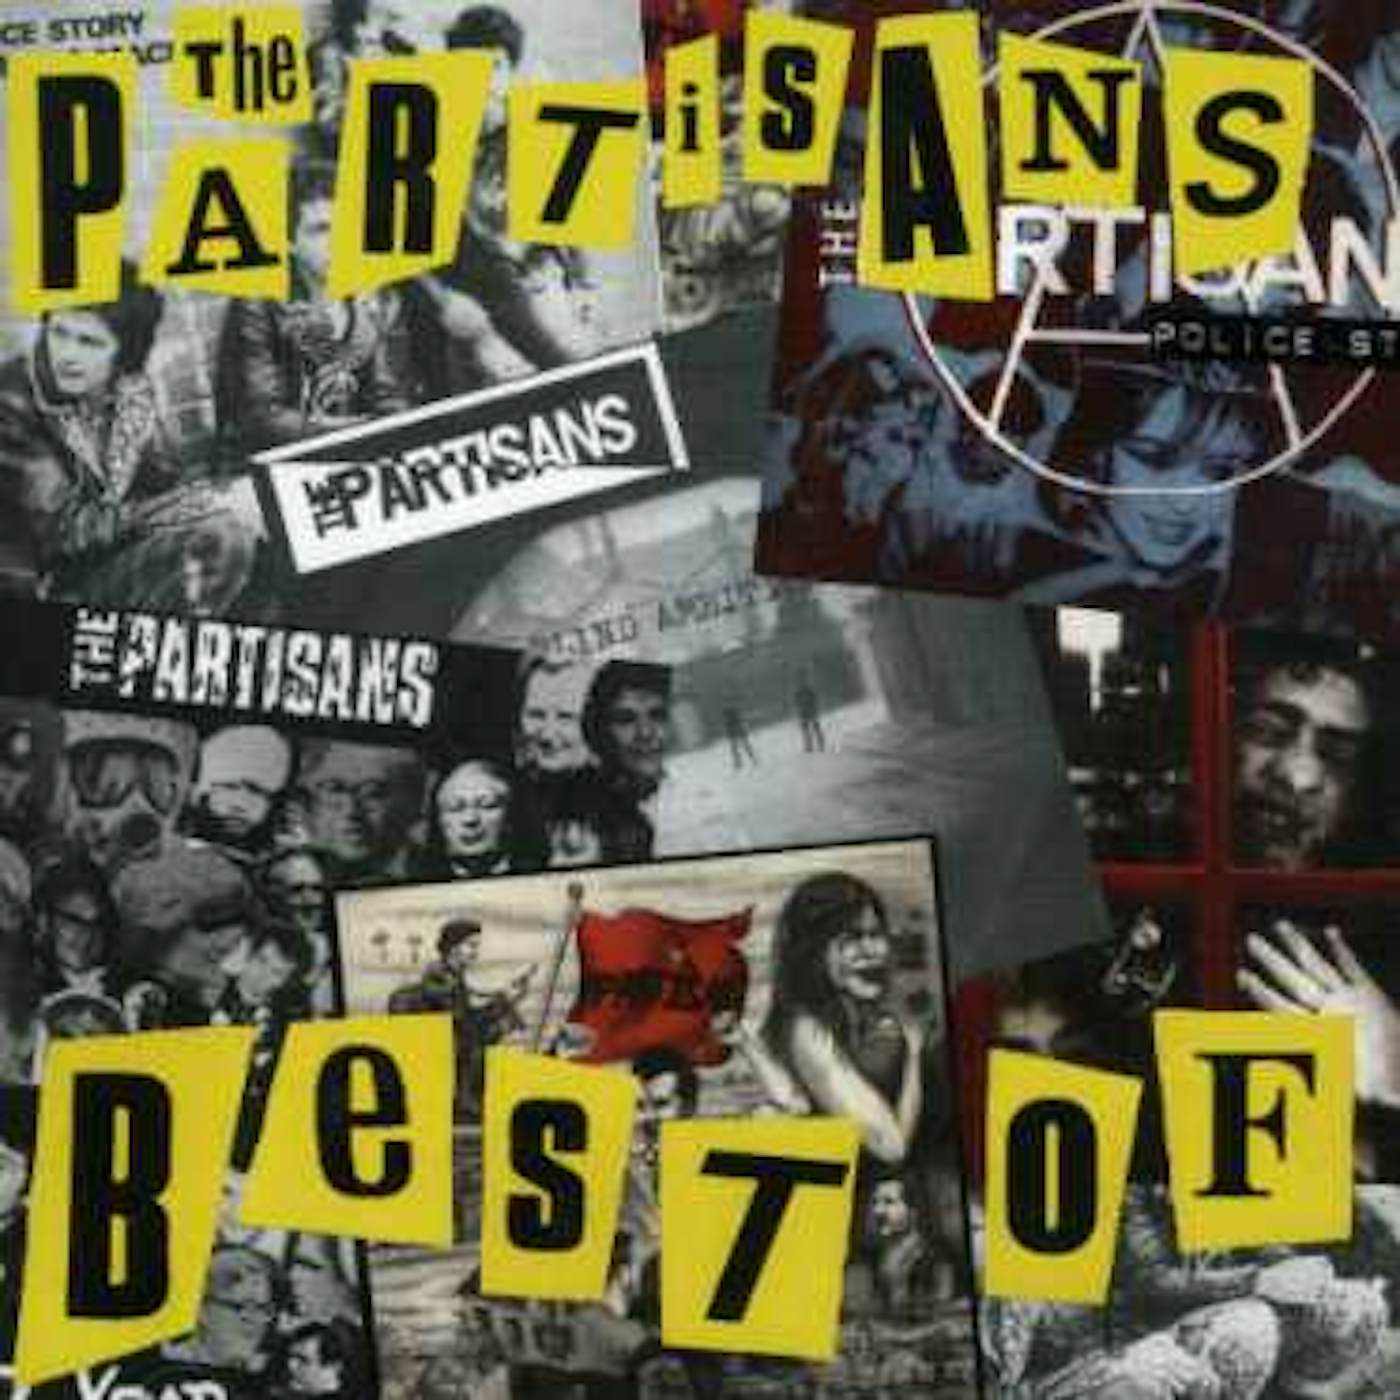 BEST OF The Partisans CD